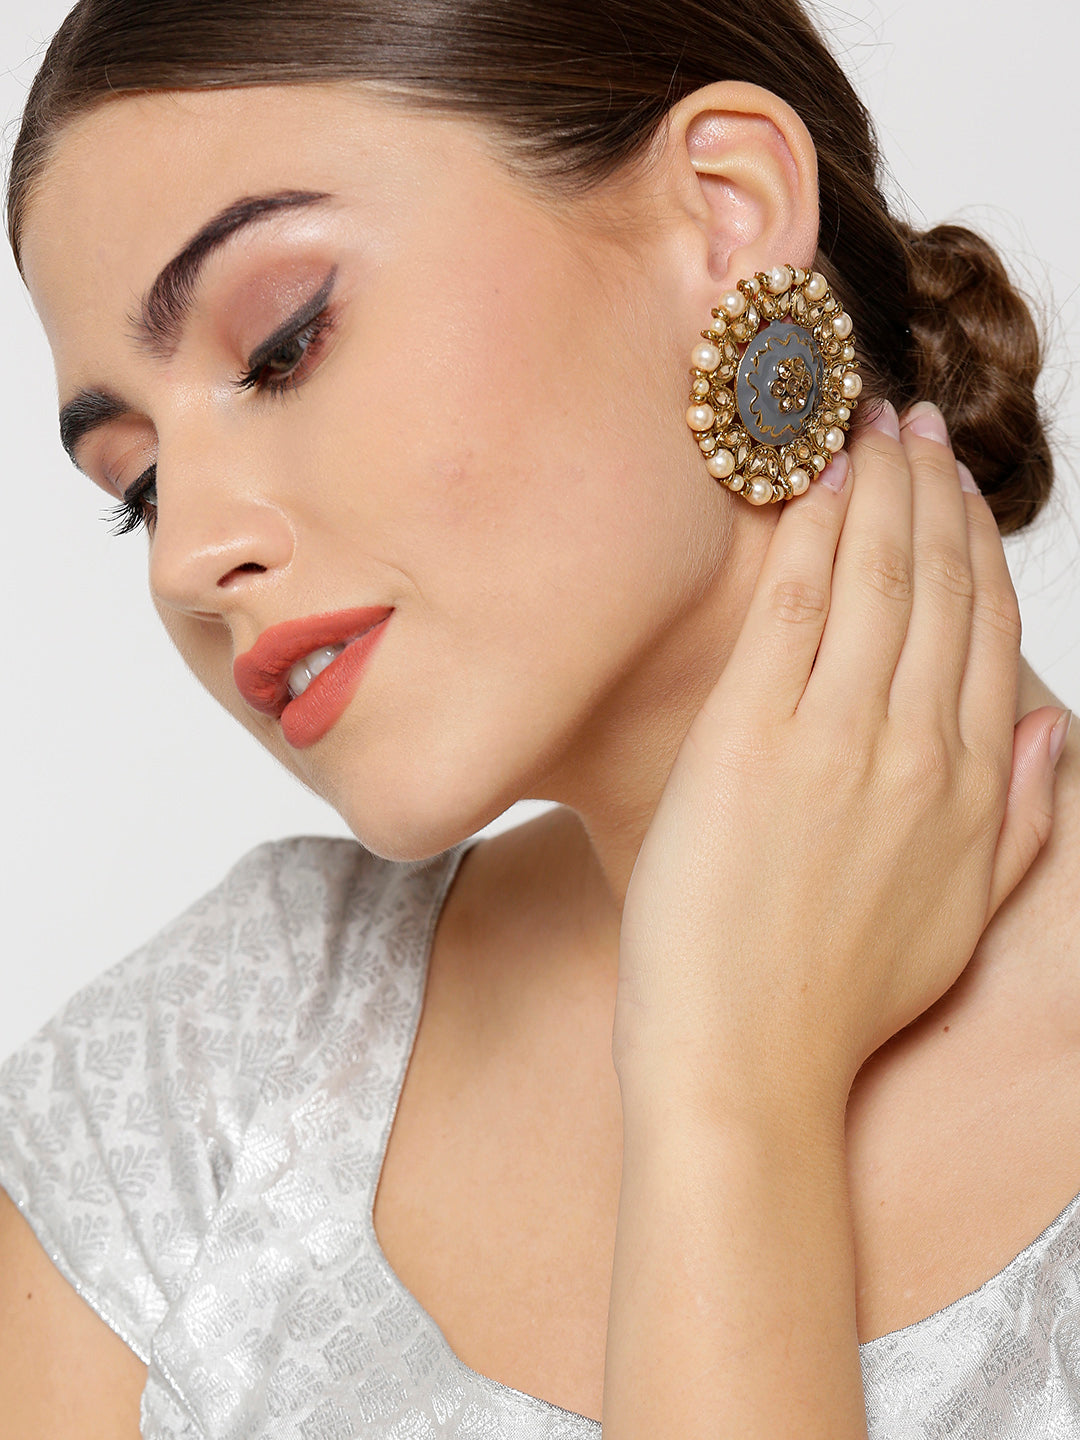 Engagement Jewelry | Party Accessories | Stud Earrings - Exquisite Cz Stone  Gold Color - Aliexpress